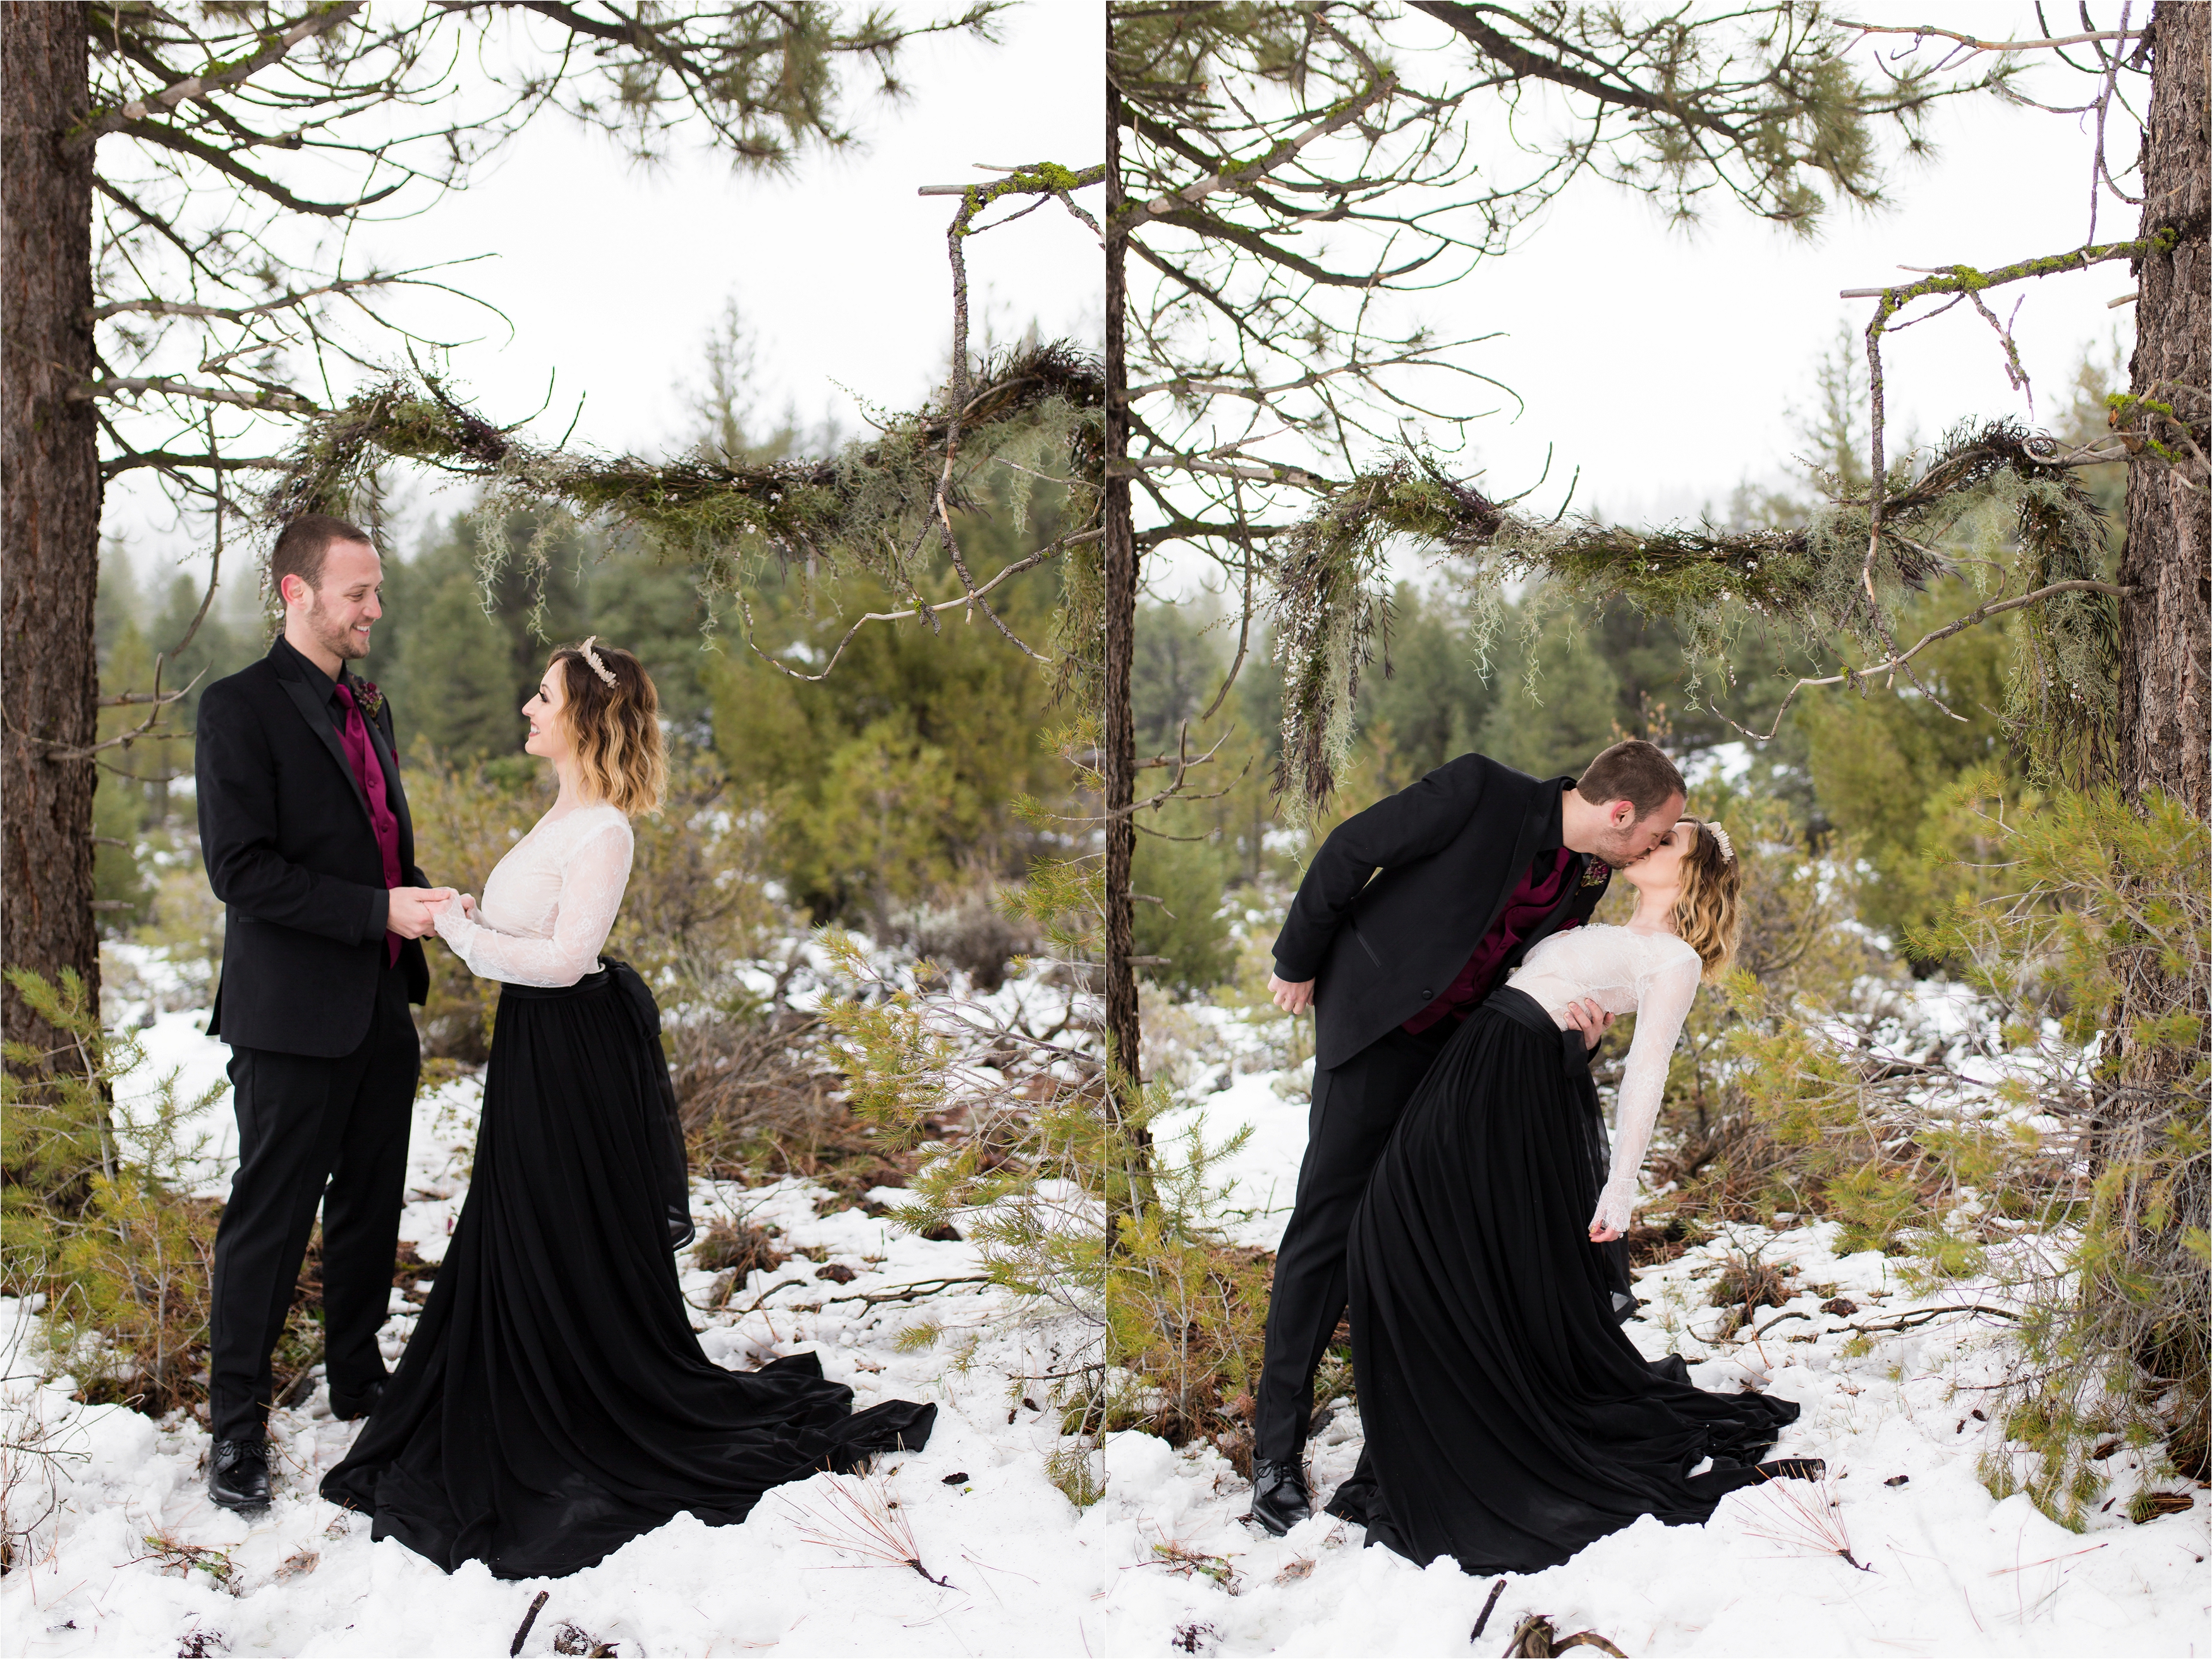 Wedding couple's first kiss at ceremony in snow in Frazier Park, CA